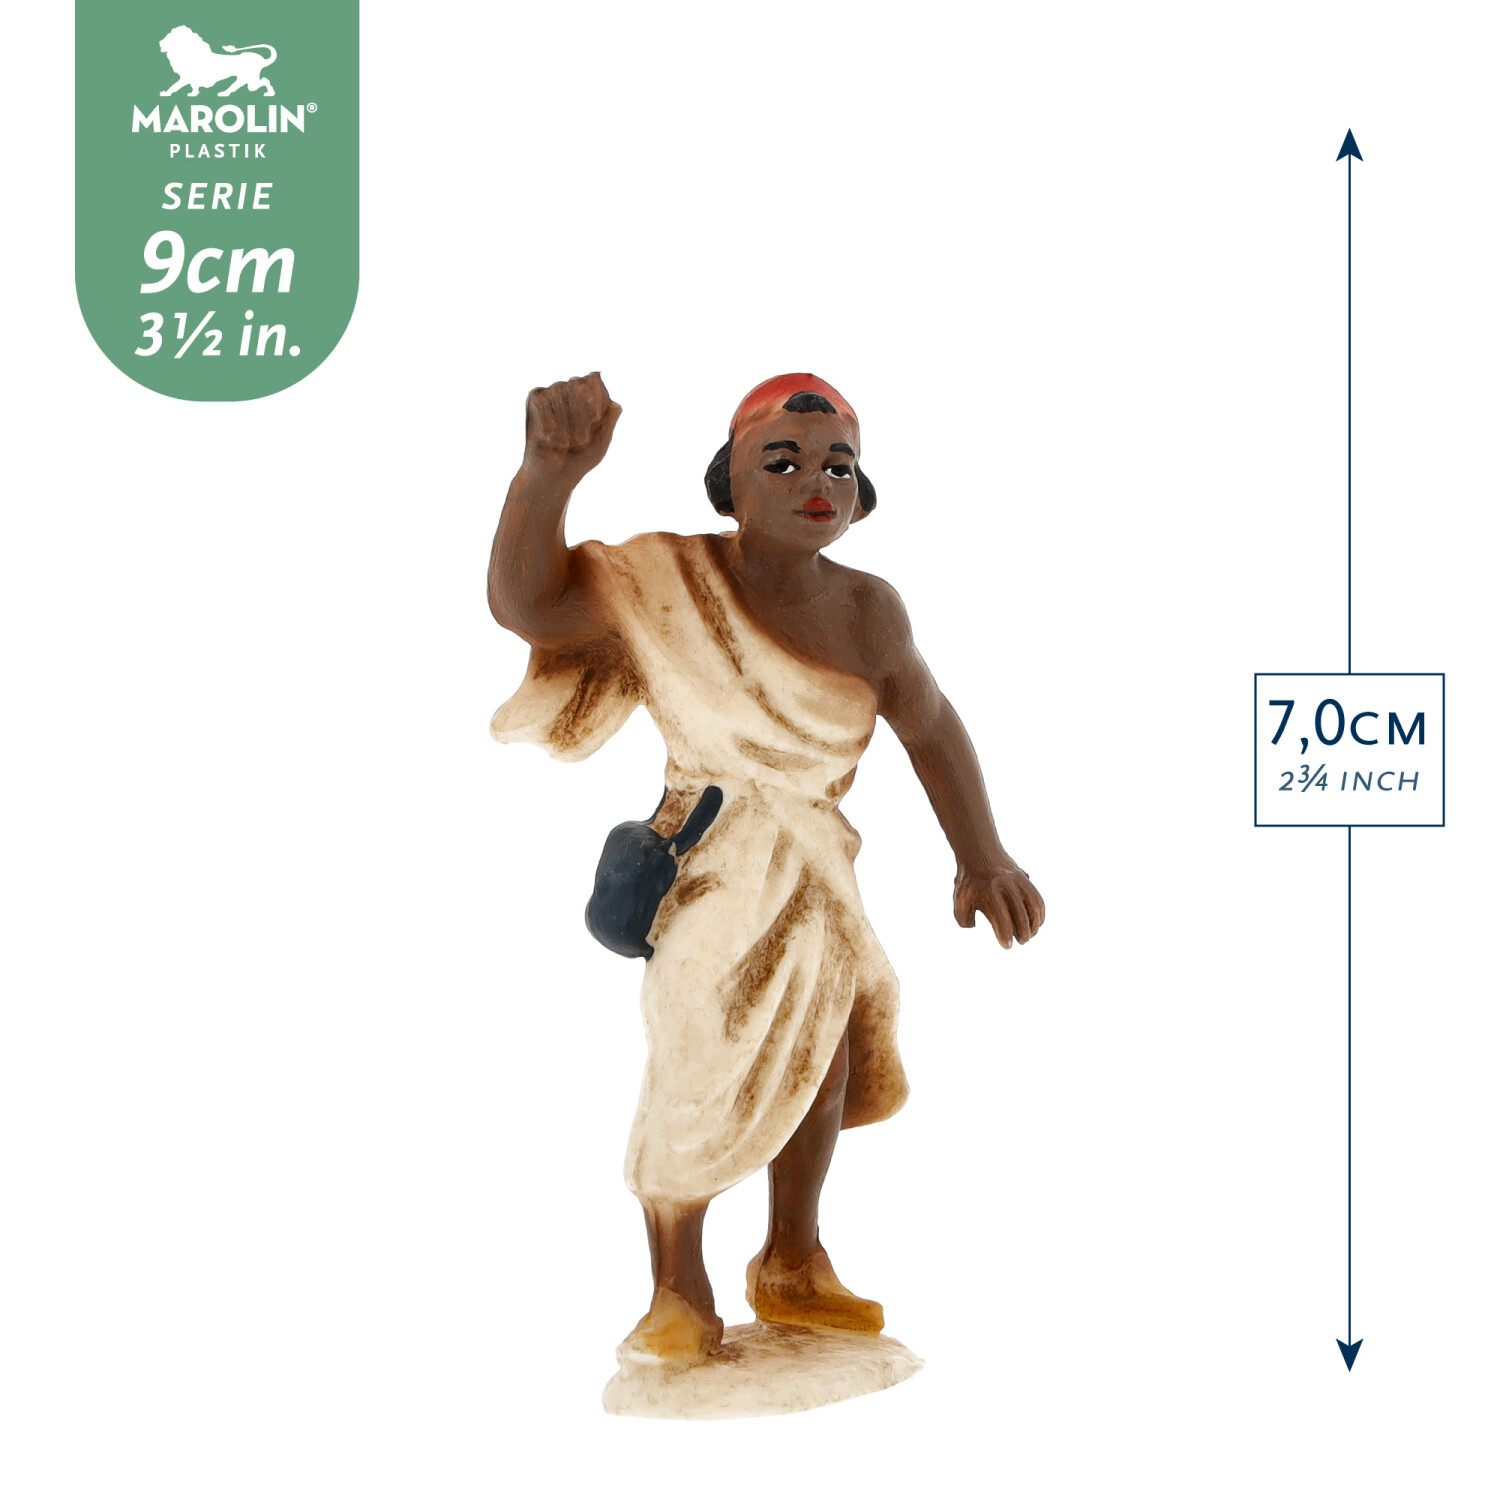 Camel driver (plastic material), to 3.5 in. Figures